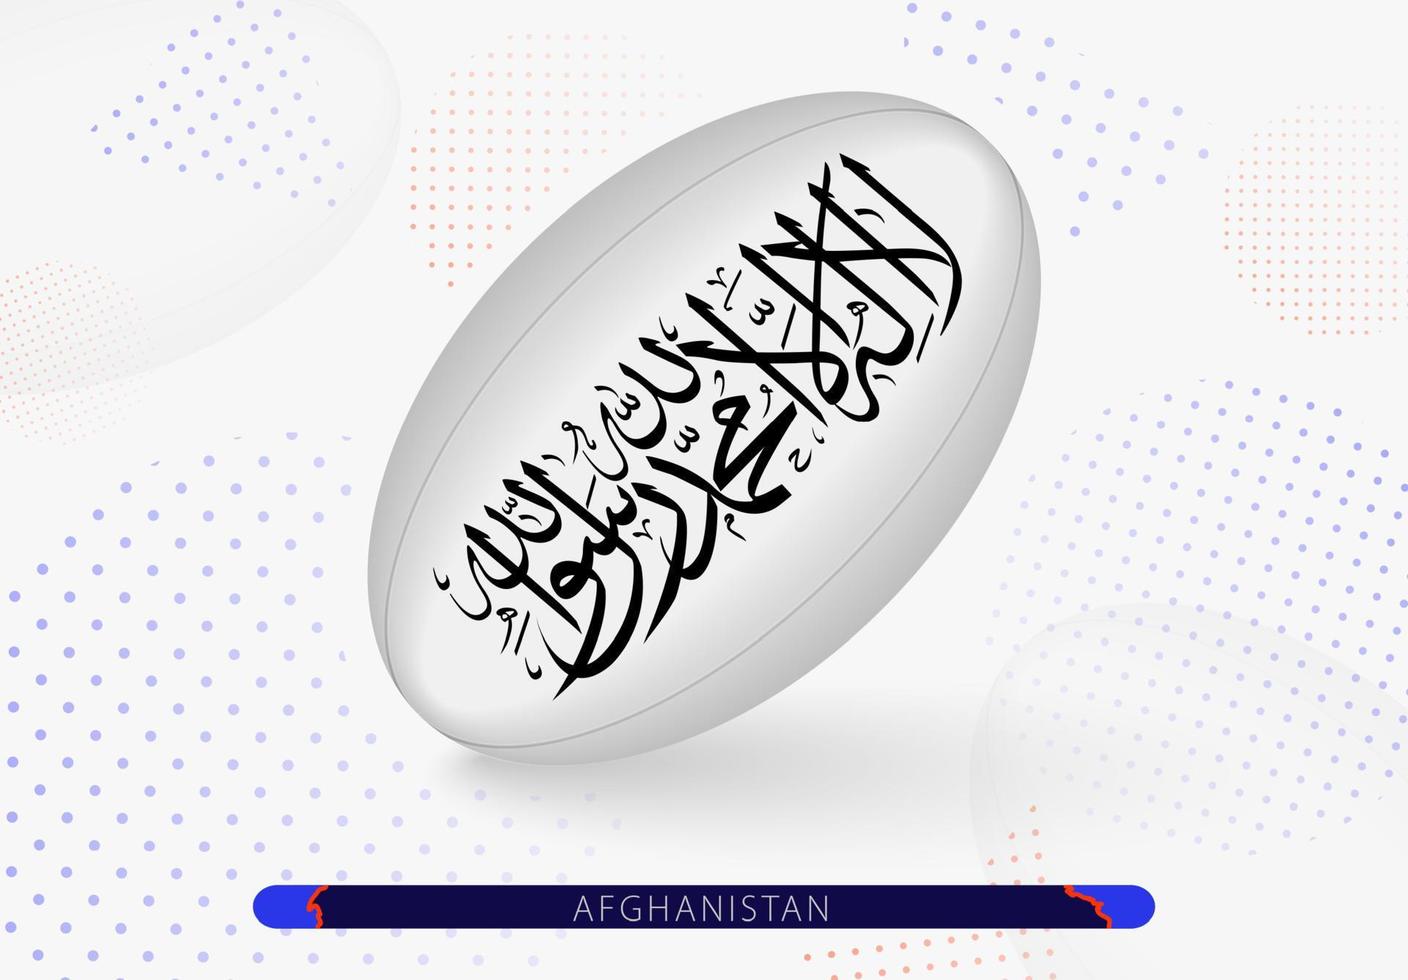 Rugby ball with the flag of Afghanistan on it. Equipment for rugby team of Afghanistan. vector